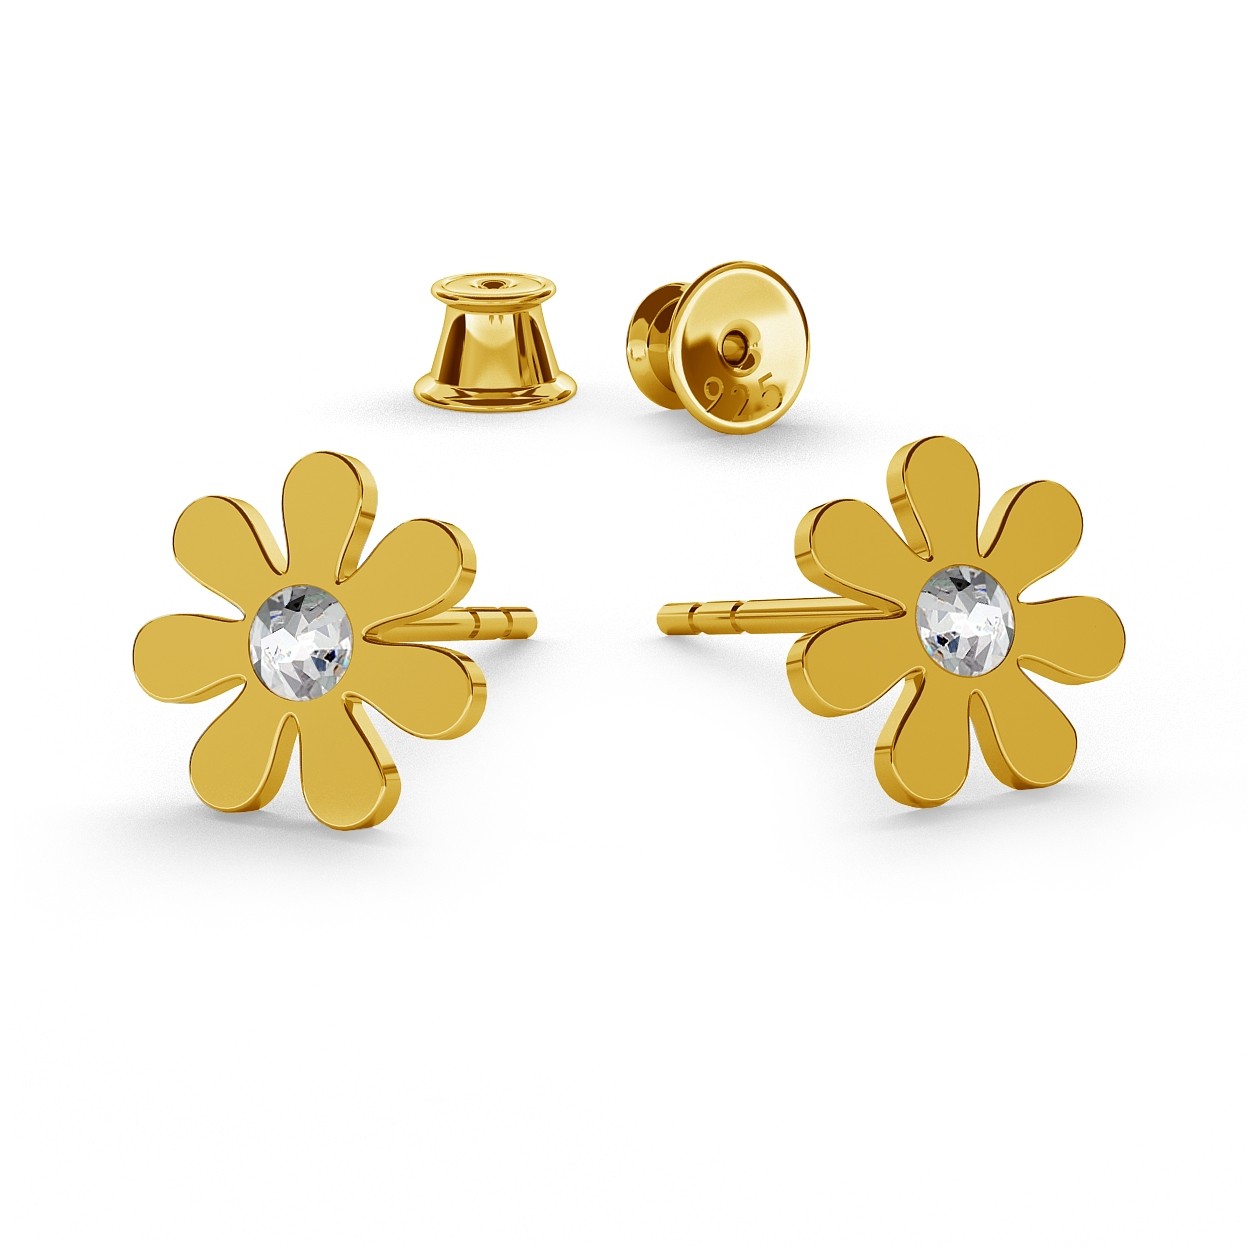 DAISY EARRINGS STUDS, SWAROVSKI 2058 SS 7, STERLING SILVER (925) RHODIUM OR GOLD PLATED